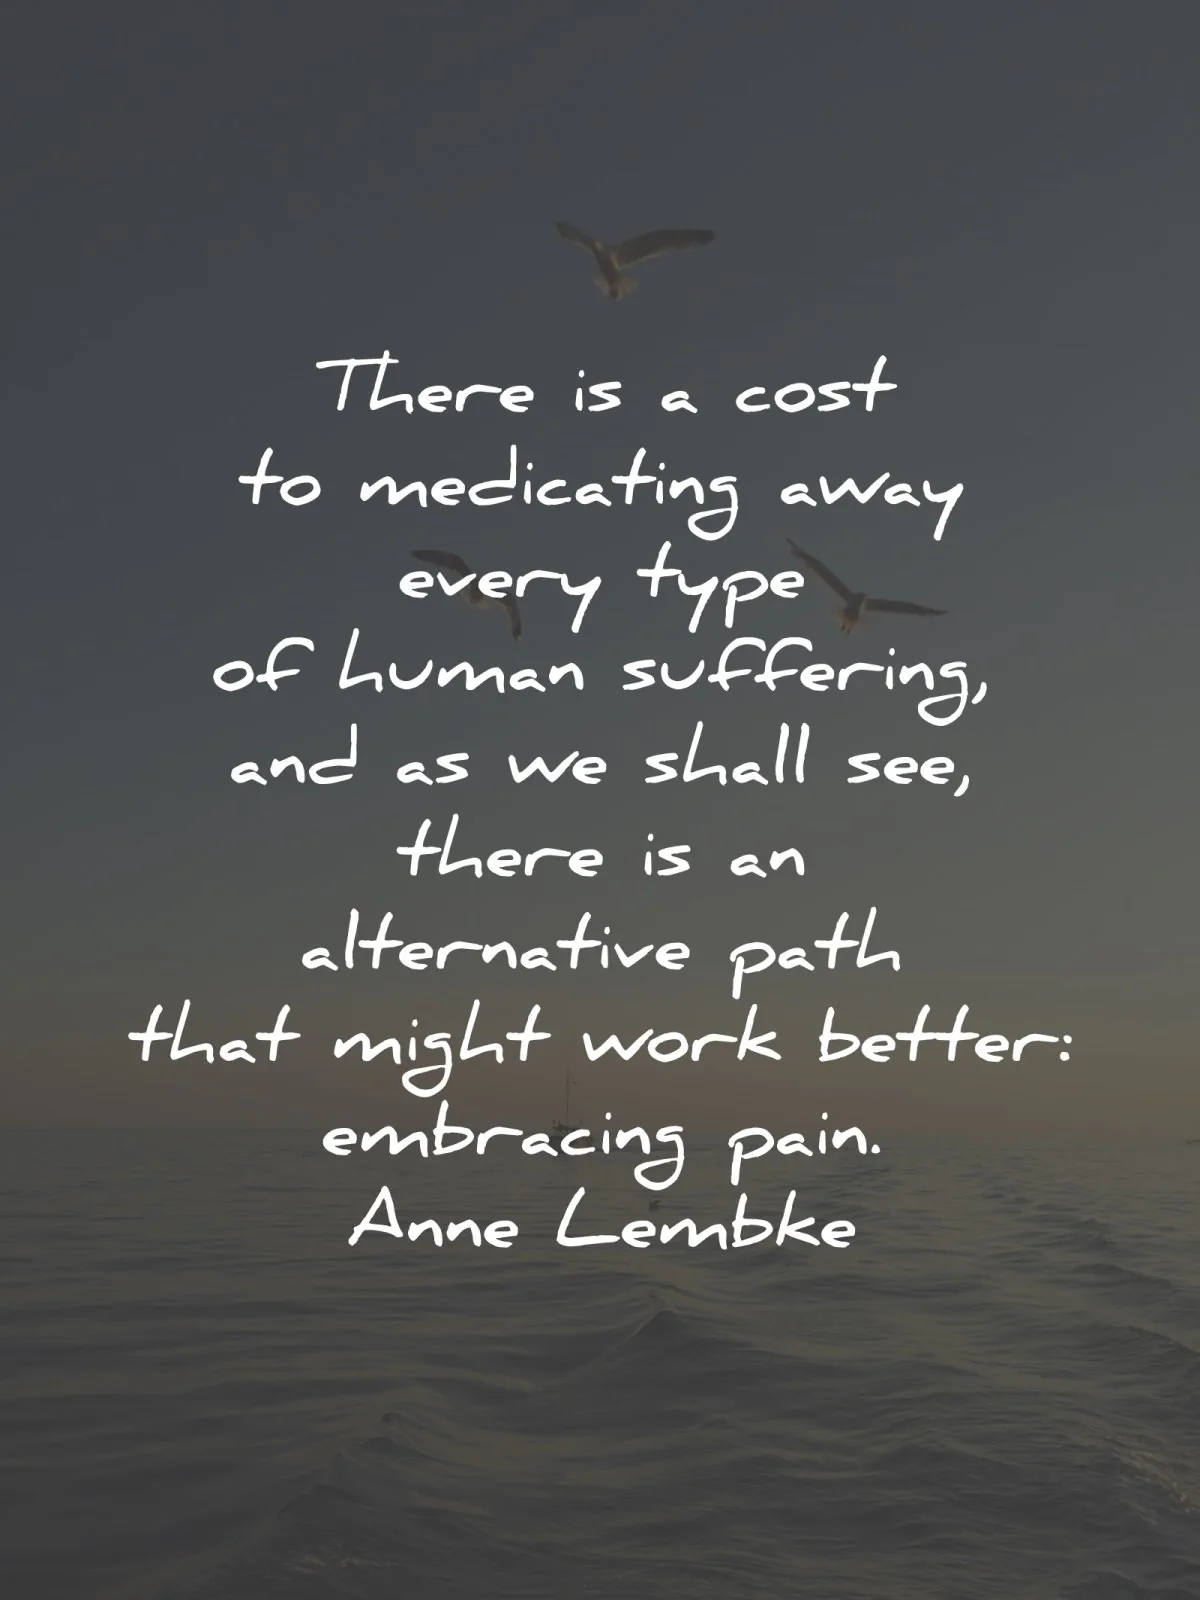 addiction social media quotes cost medicating away suffering anne lembke wisdom